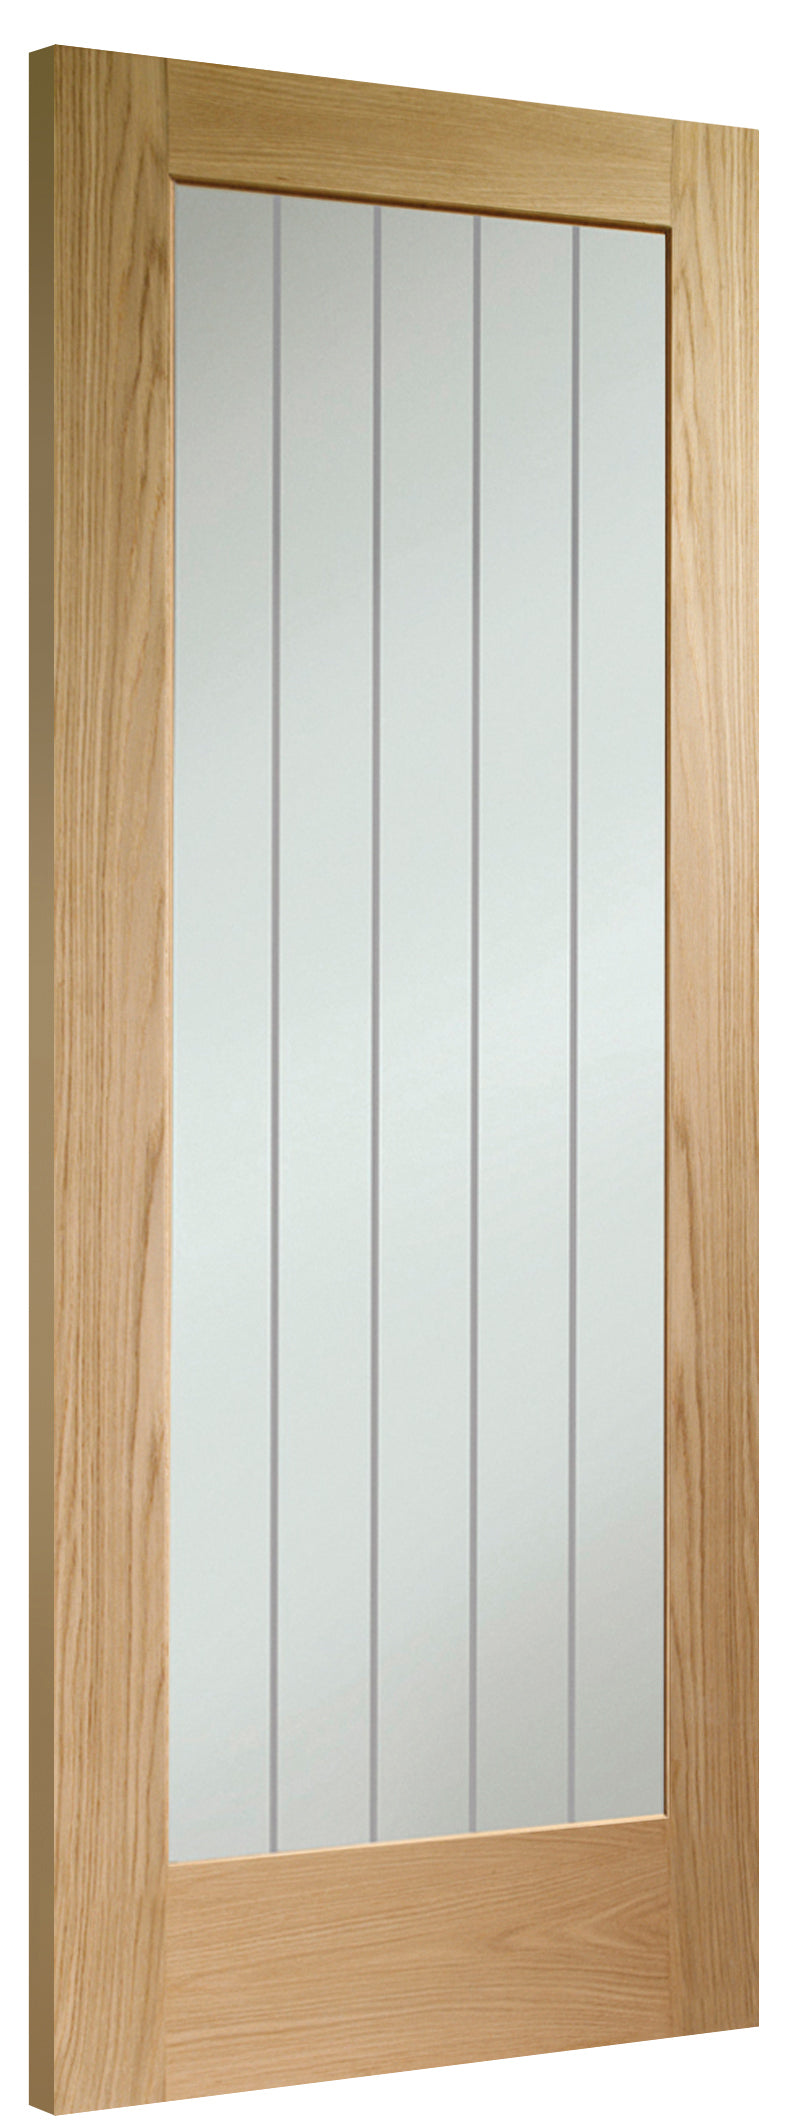 Suffolk P10 Internal Oak Fire Door with Clear Etched Glass